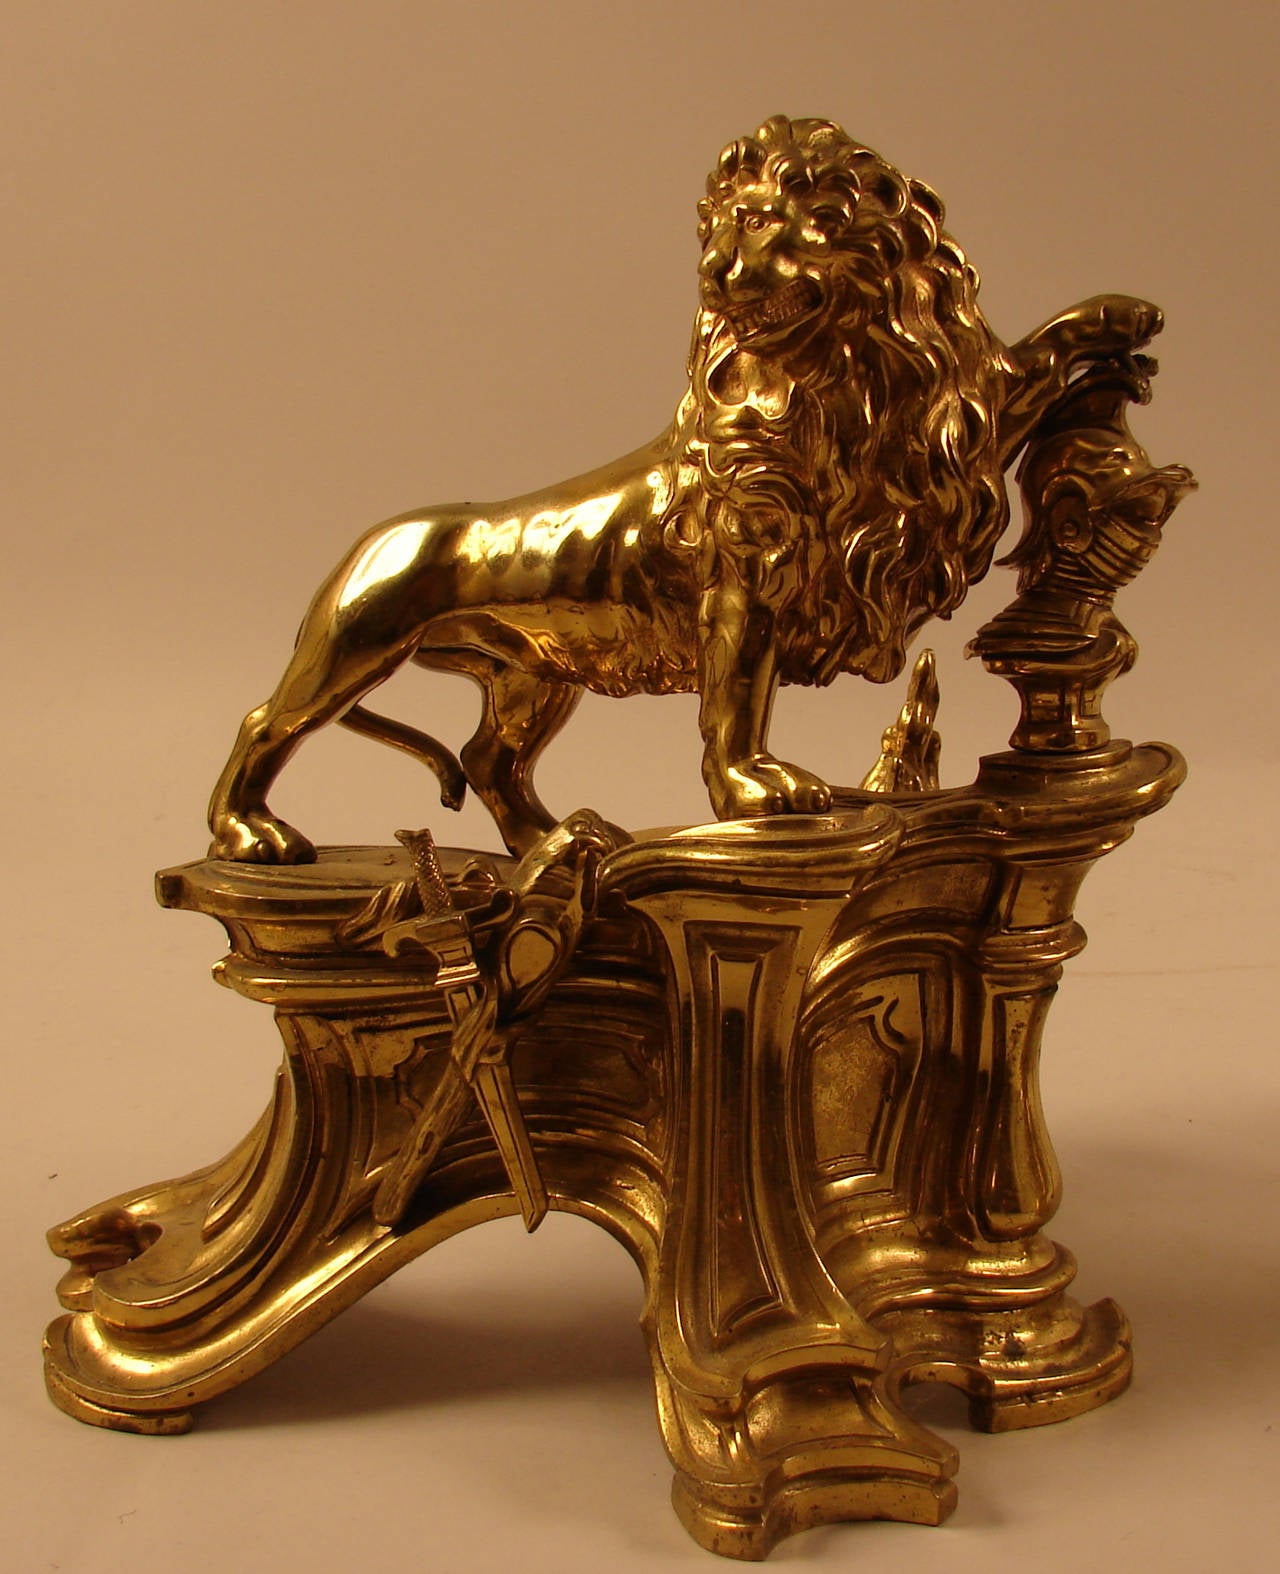 A fine pair of beautifully made bronze or brass chenets, the naturalistically modeled lions in a lively posture with expressive faces, one holding a shield, the other a knight's helmet resting on stylized plinths, 19th century.